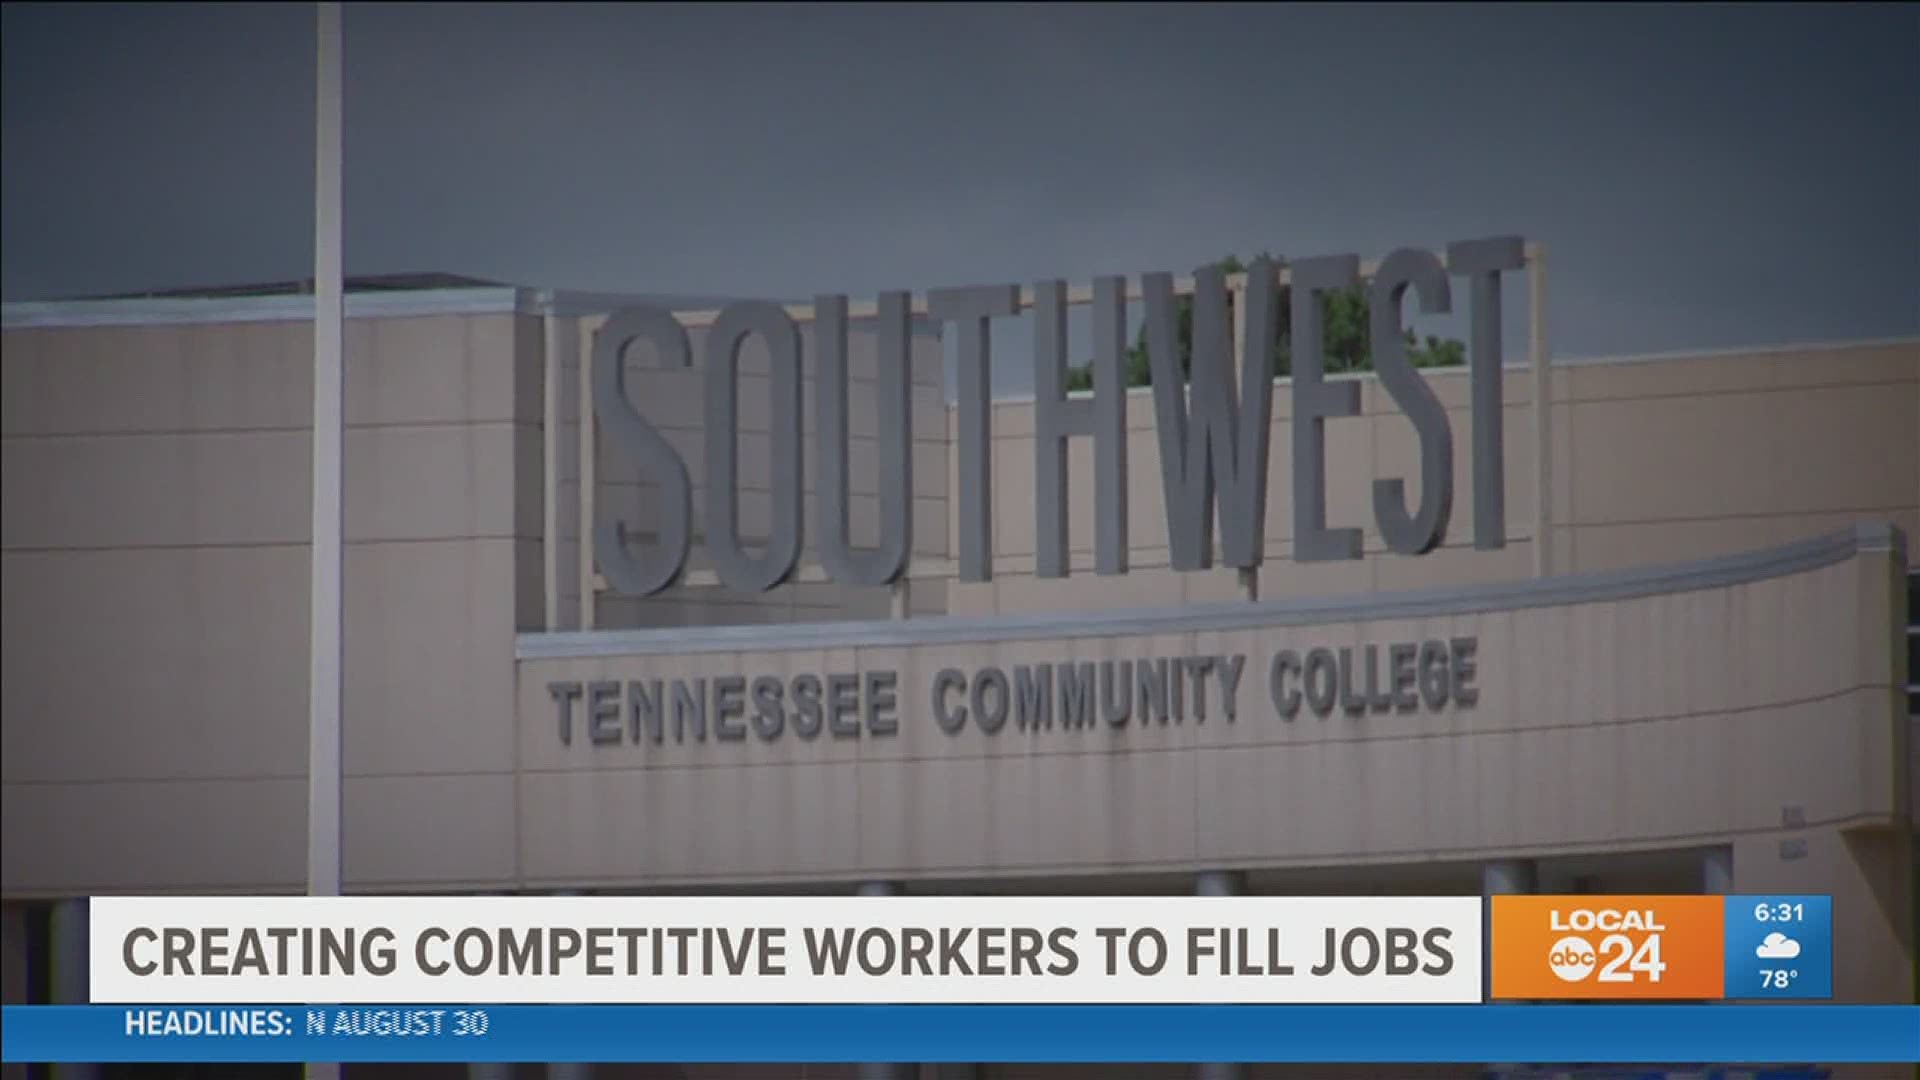 The pandemic has shaken up the workforce. Southwest says people between jobs have a lot of options to pursue "pandemic proof" careers.